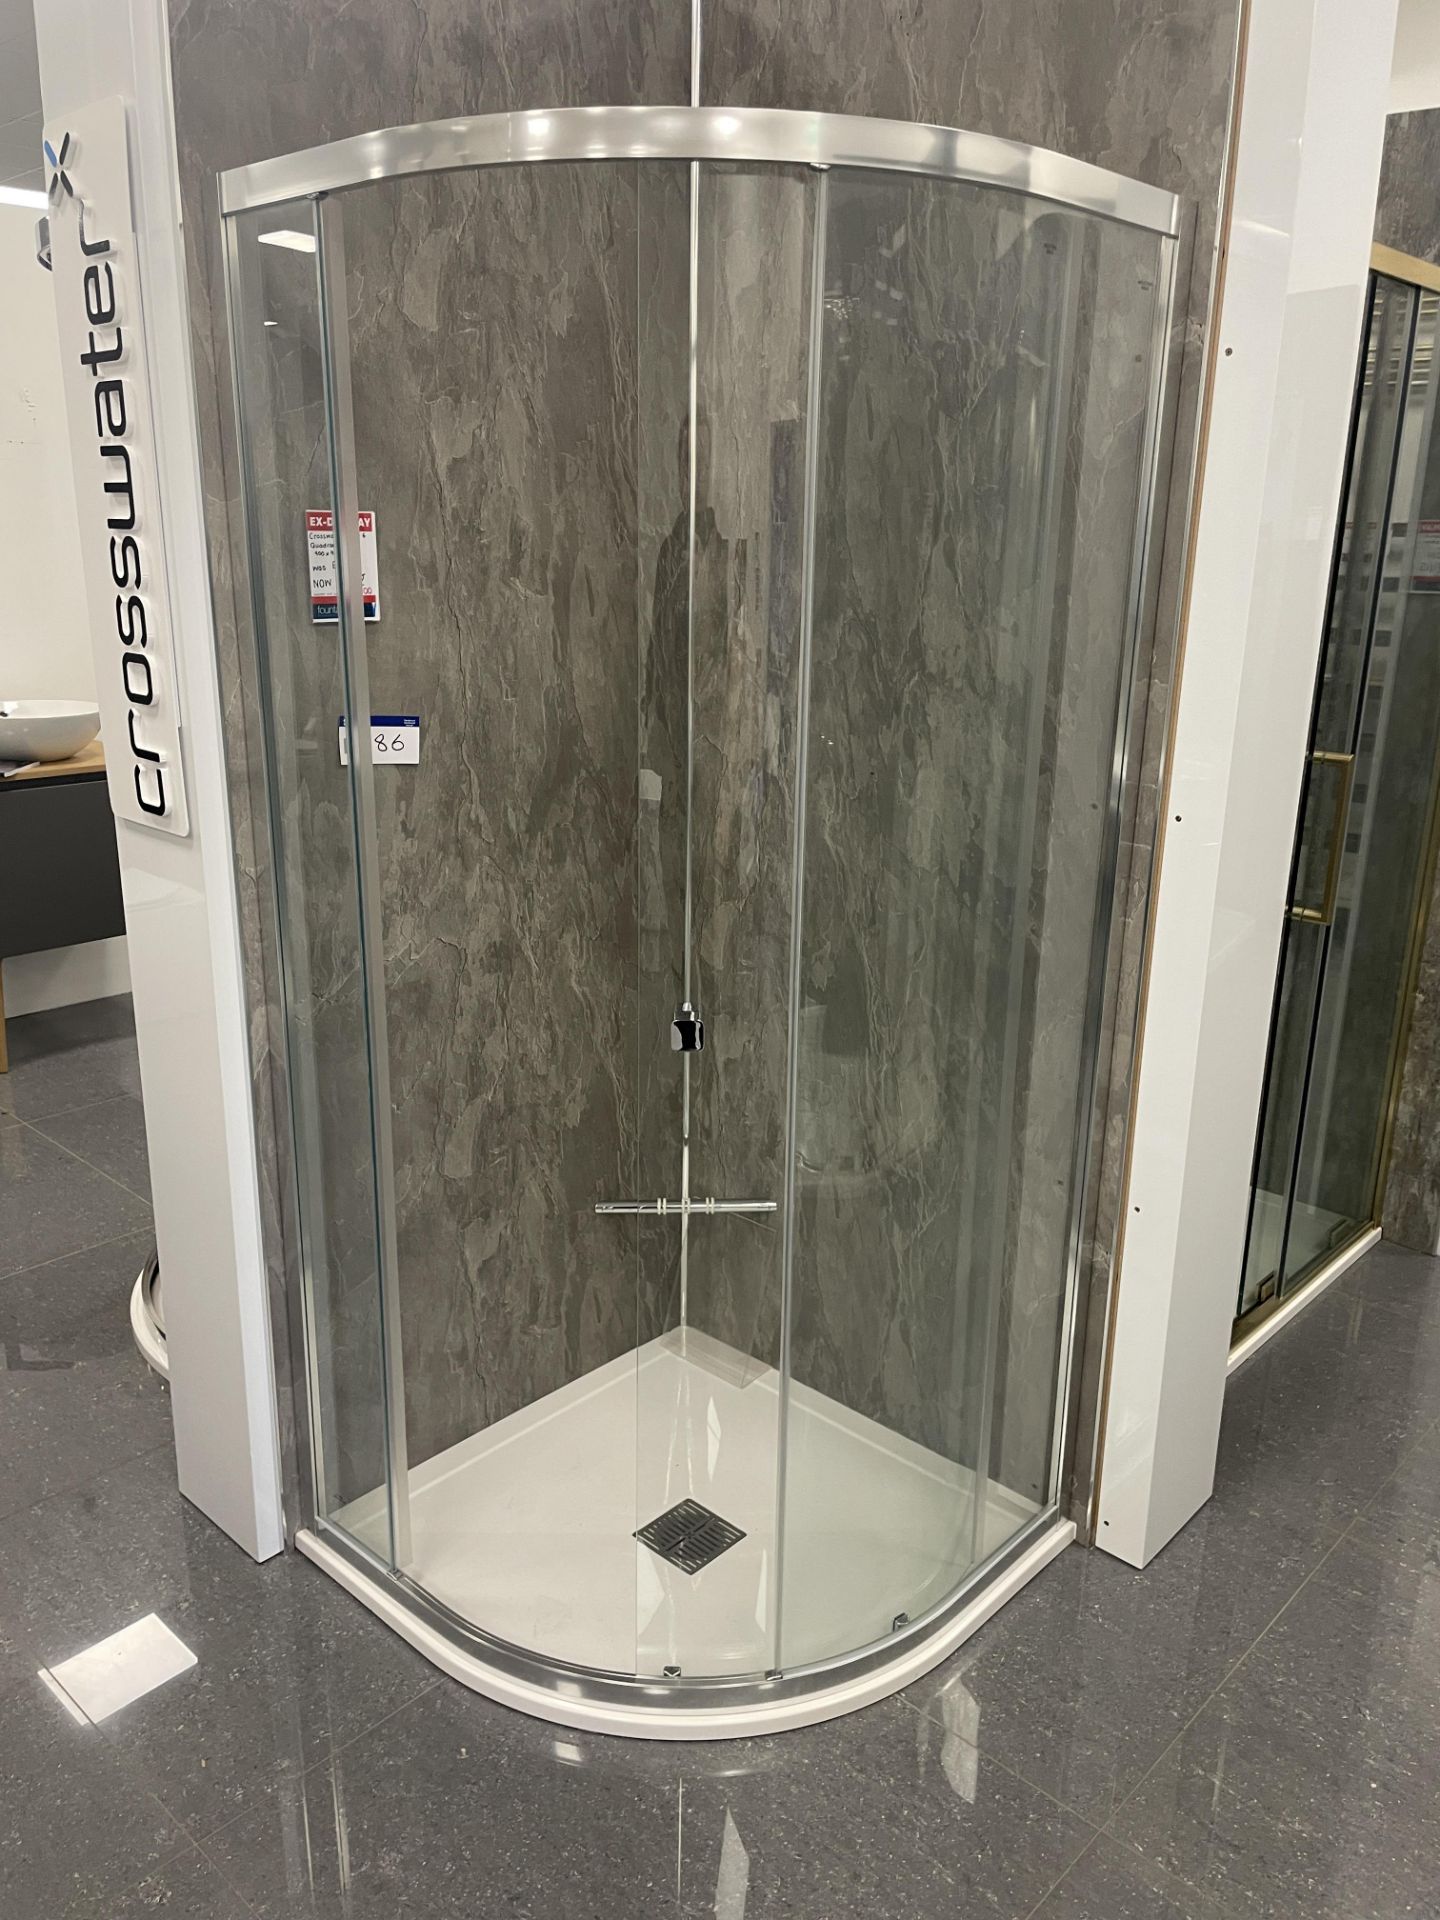 Crosswater Clear 6 Quadrant Enclosed Shower, approx. 900mm x 900mm Please read the following